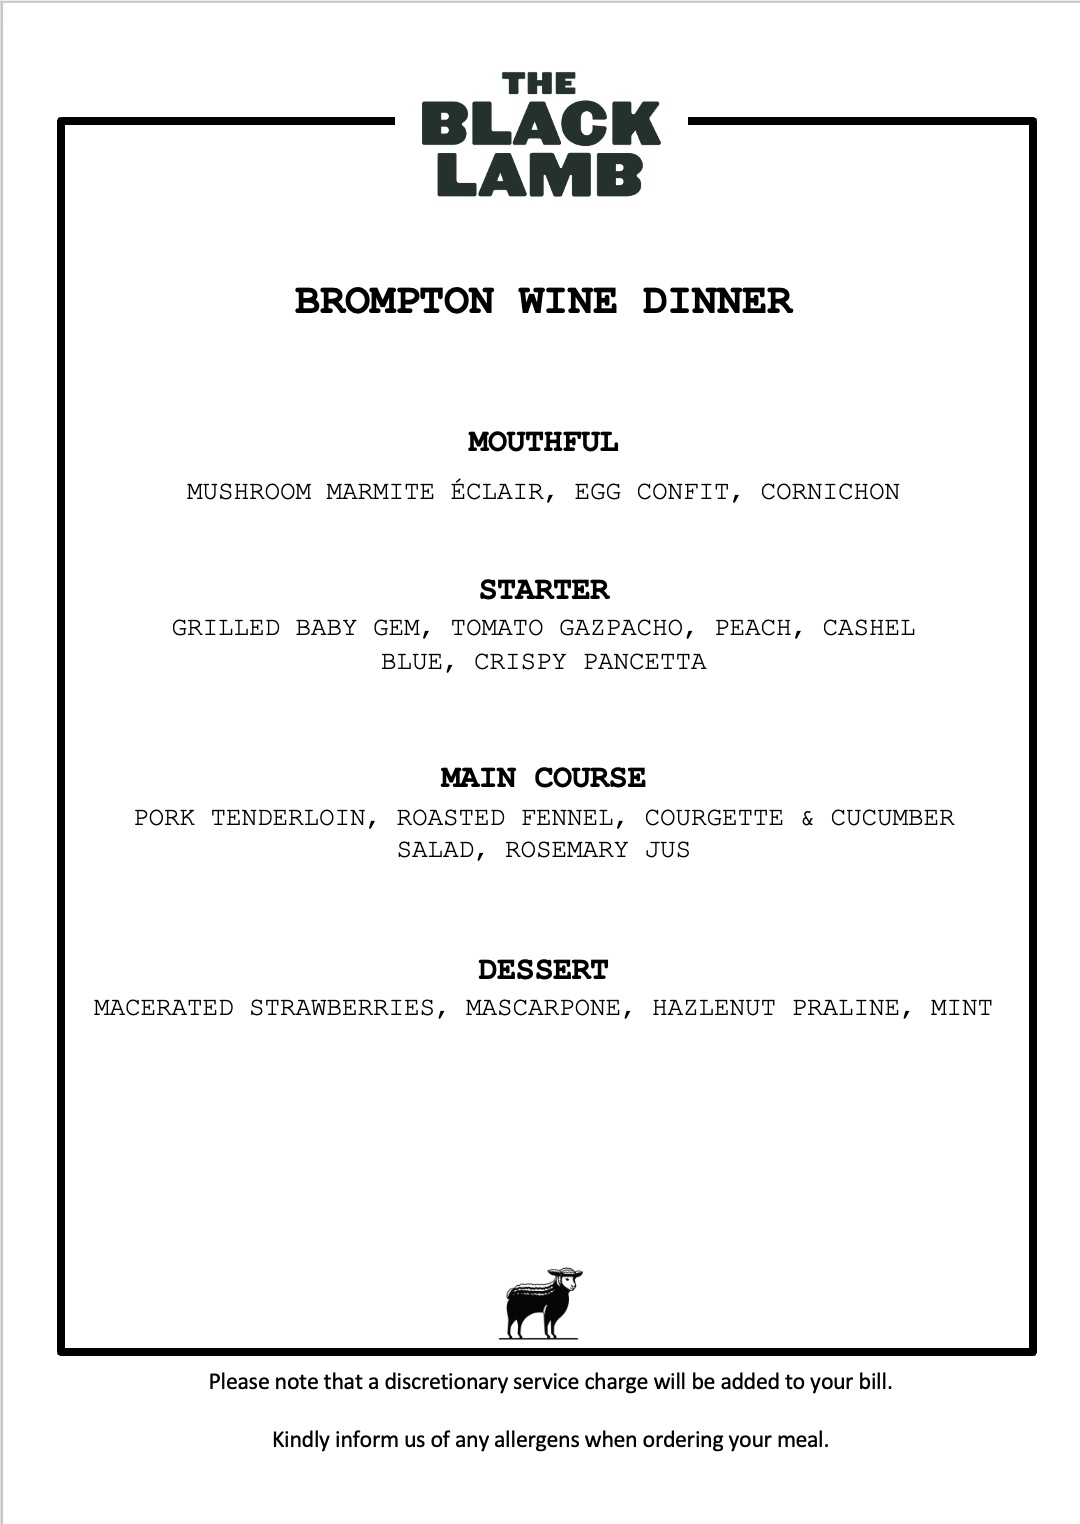 SOLD OUT Brompton Wine Dinner